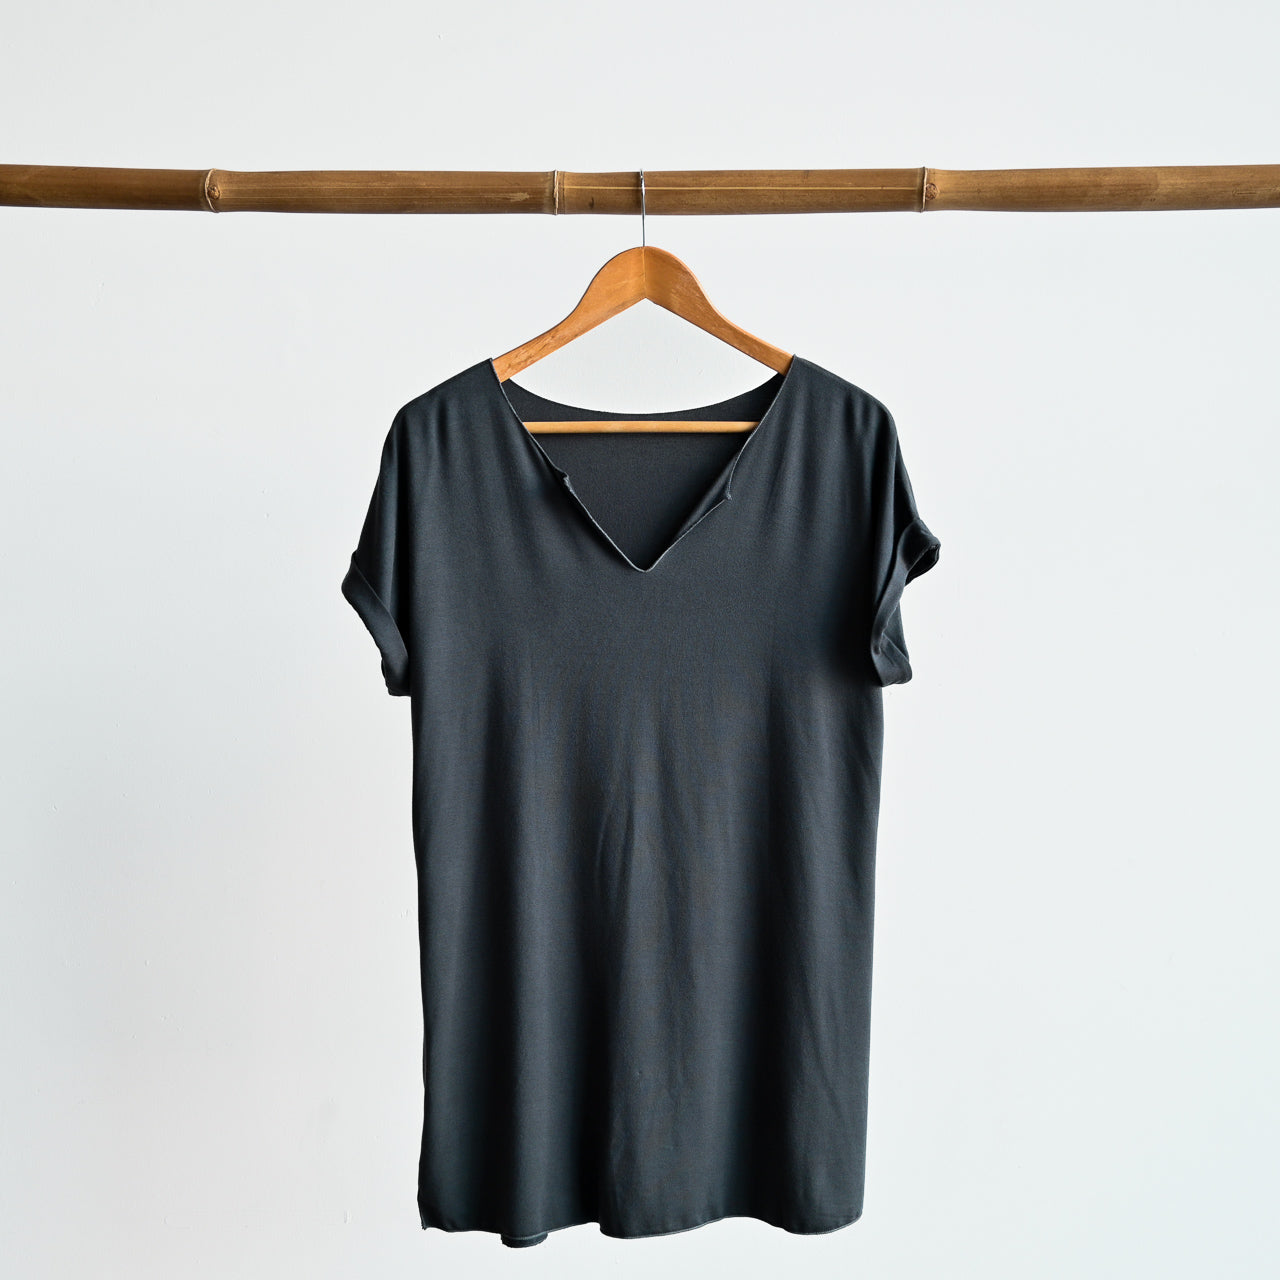 In The Moment T-shirt made in bamboo - short-sleeved women's basic top ...